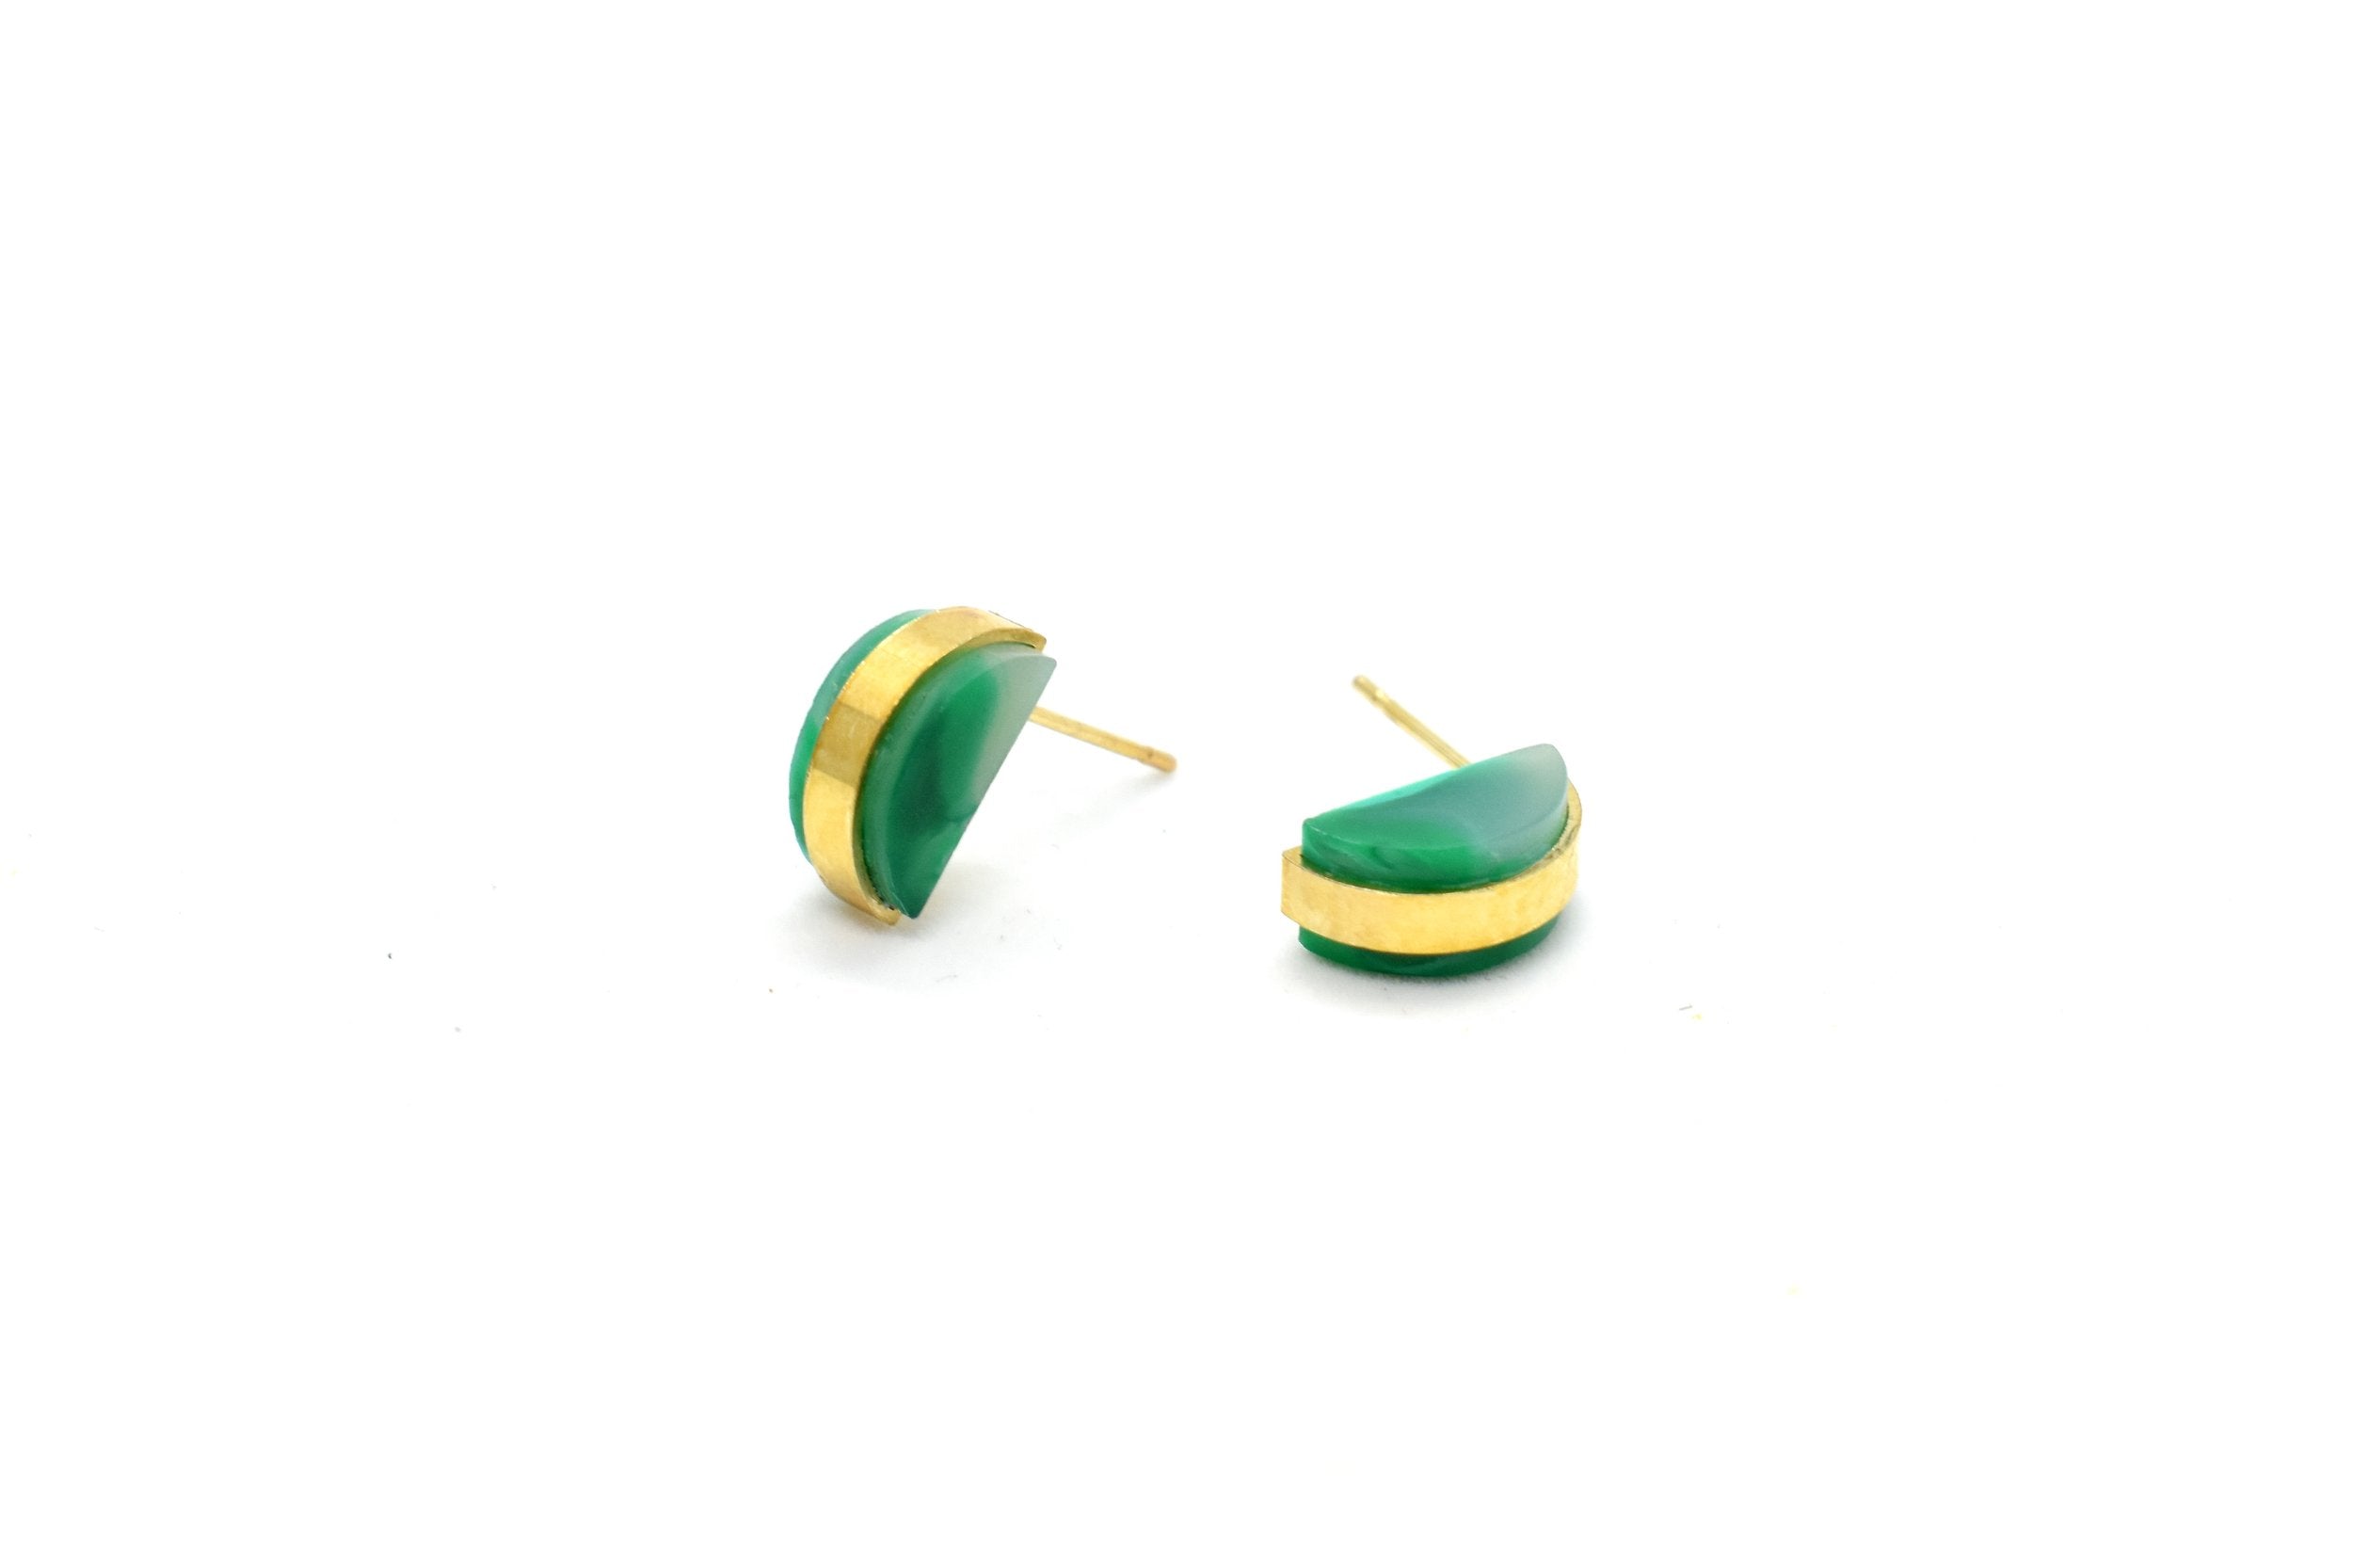 a pair of emerald studs is shown laying down to show off the surgical steel hypoallergenic posts that are great for sensitive ears. The jade studs are great for may birthday gifts